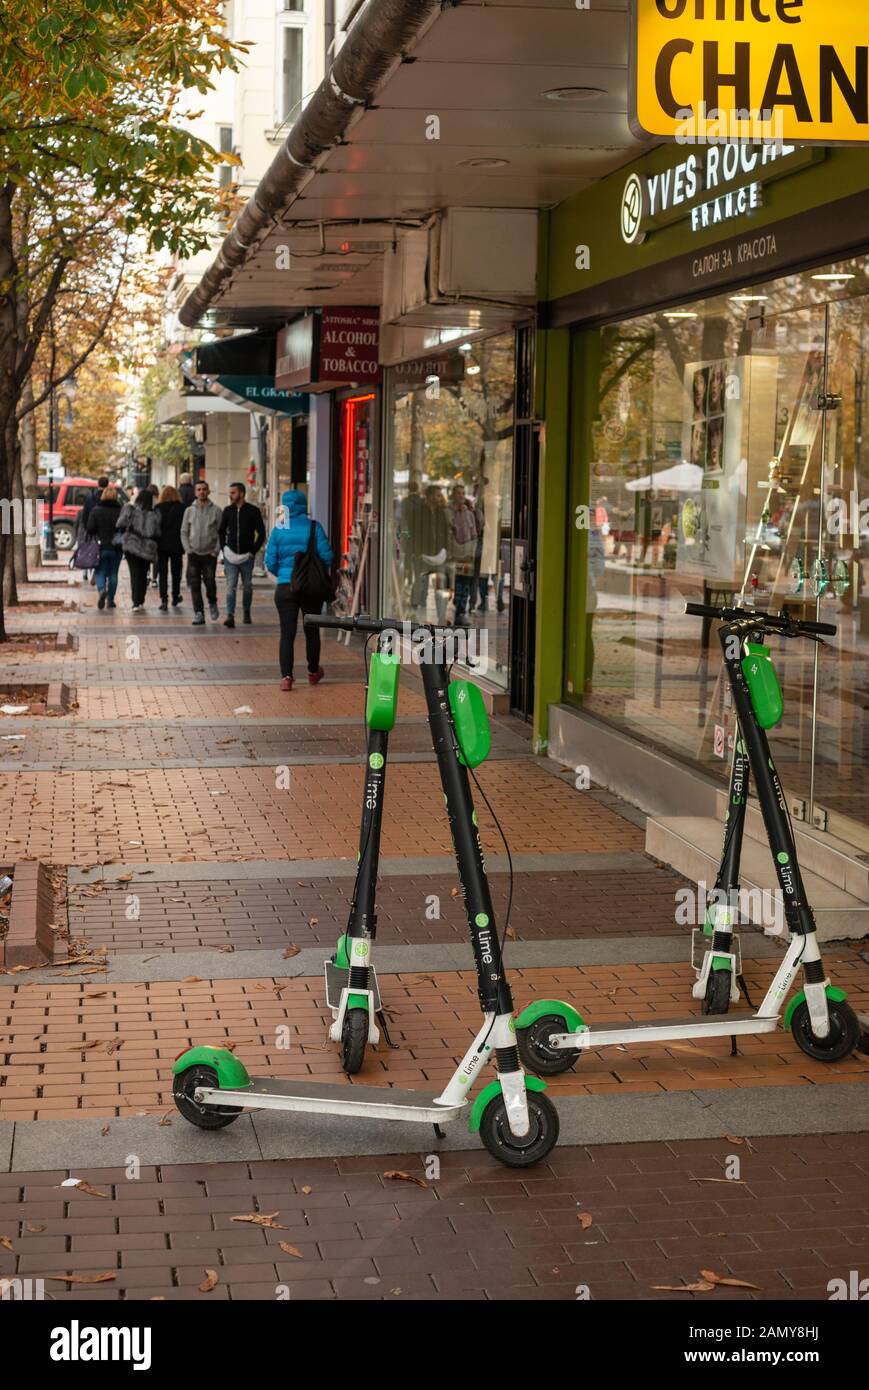 Multiple Lime electric scooters or e-scooters left disorderly scattered in the middle of sidewalk in Sofia Bulgaria Eastern Europe EU Stock Photo